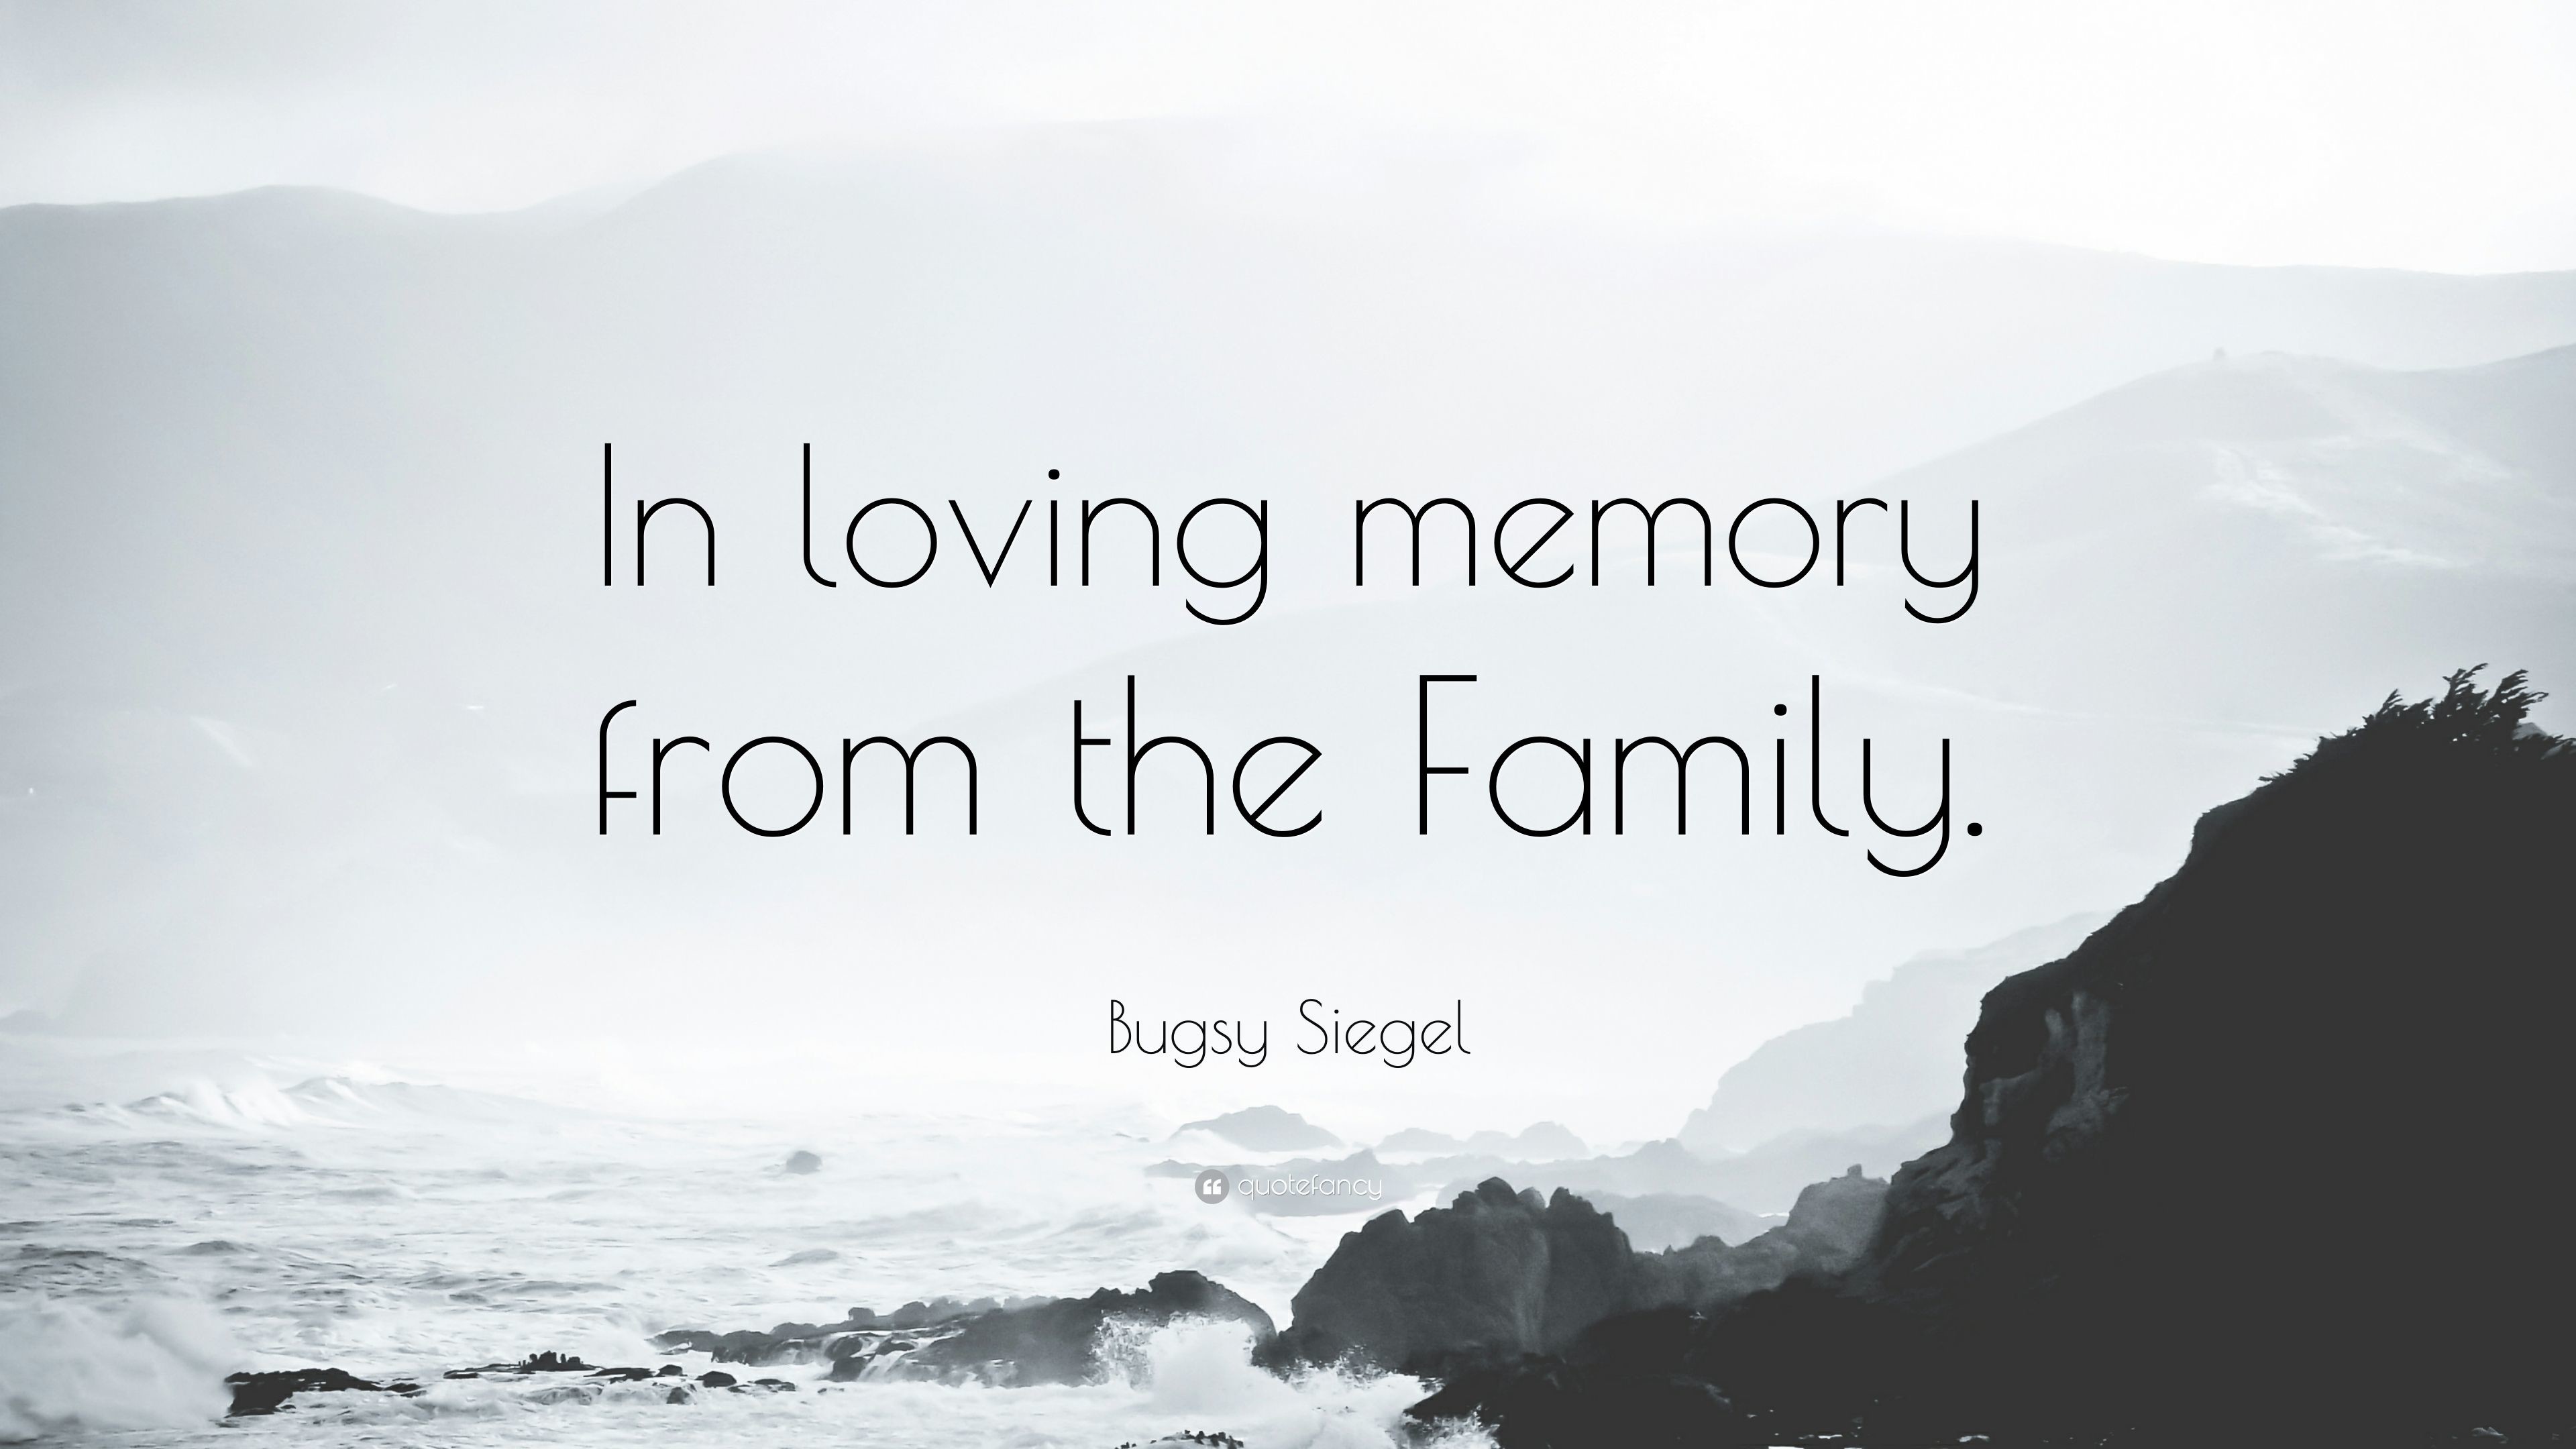 3840x2160 Bugsy Siegel Quote: “In loving memory from the Family.”